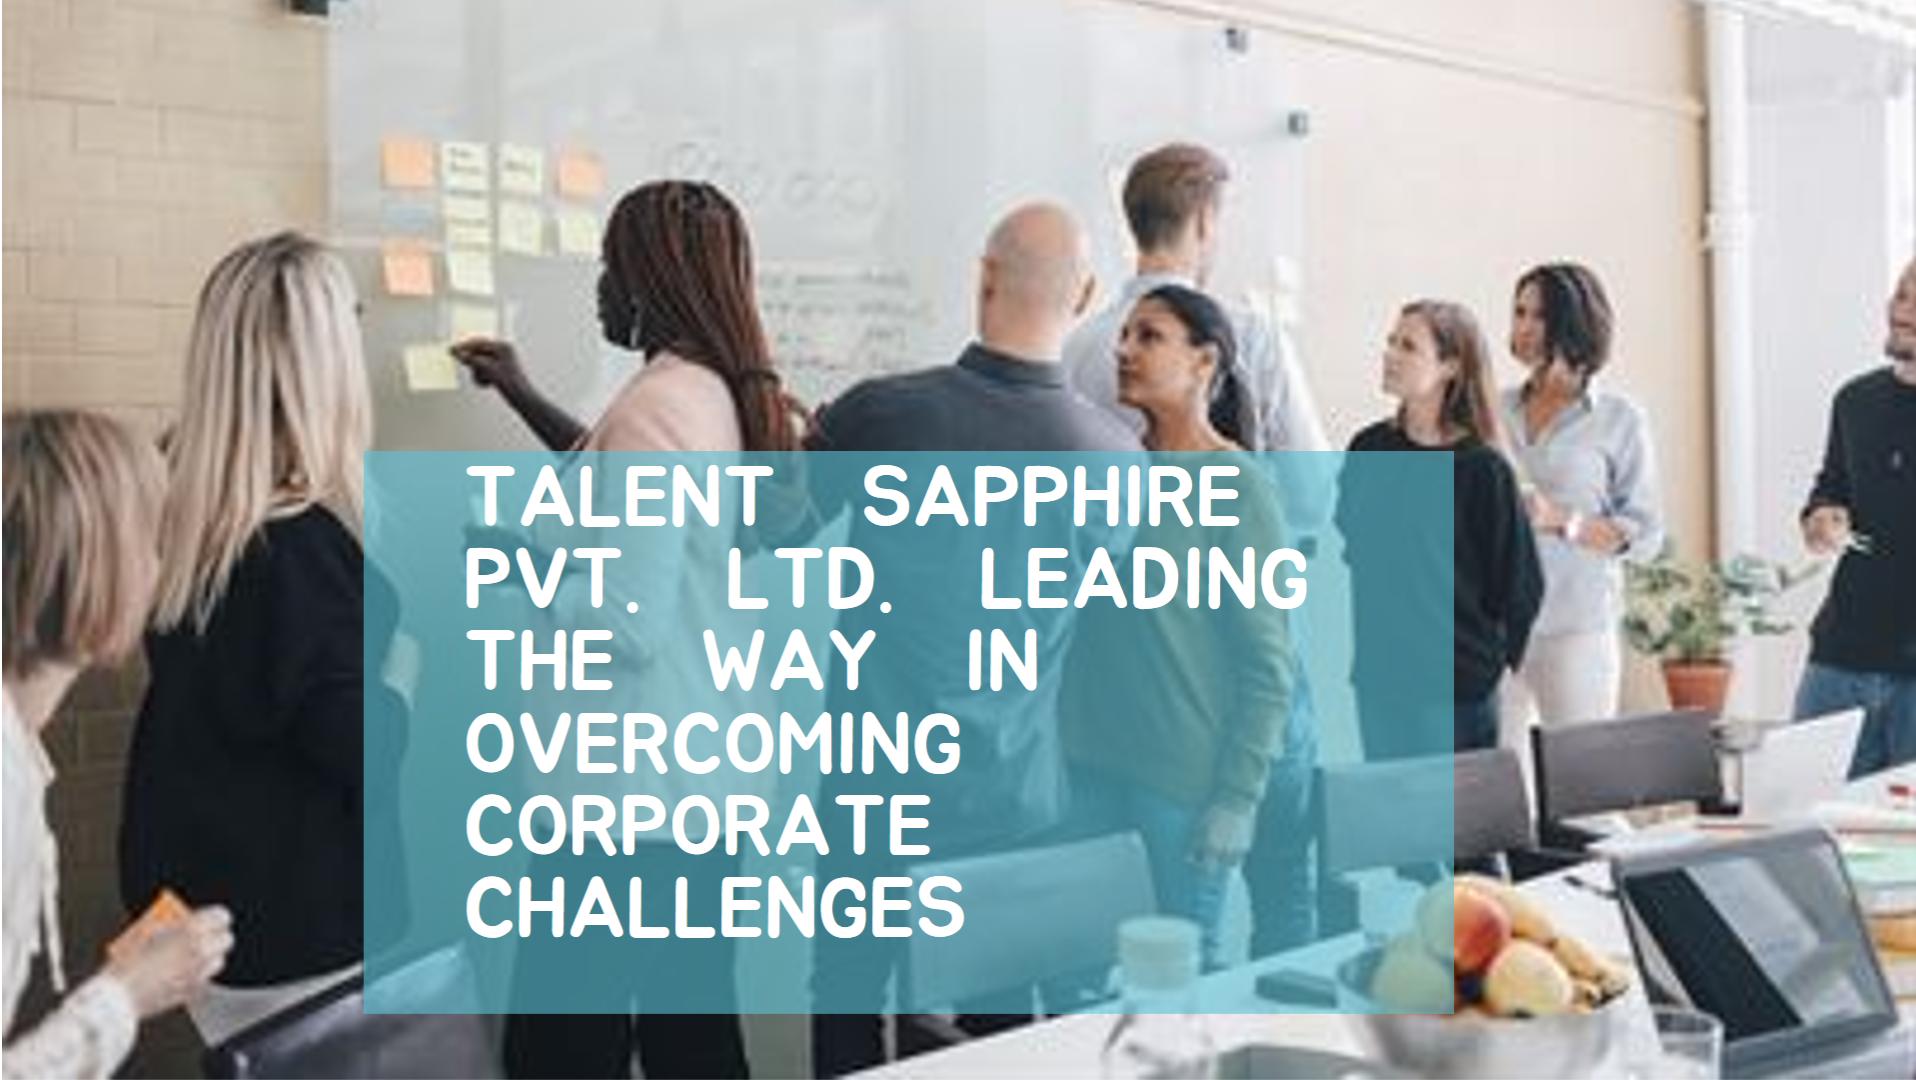 Overcoming Corporate Challenges: How Talent Sapphire Pvt. Ltd. Leads the Way